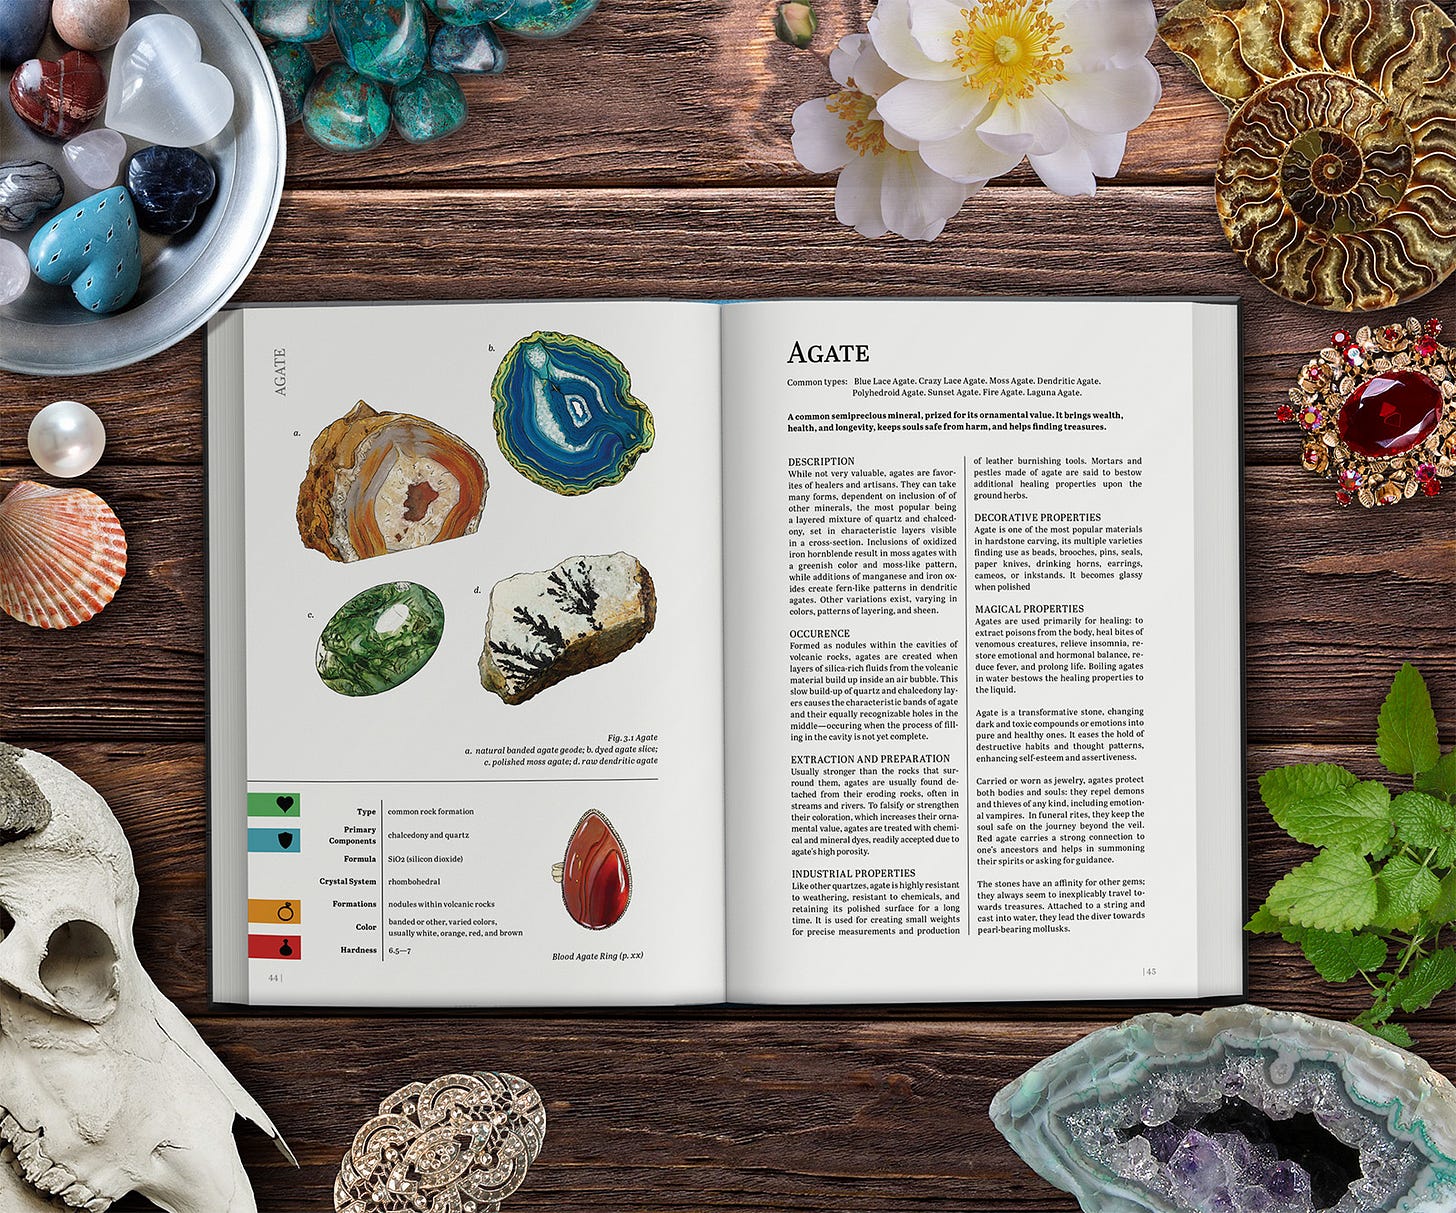 A mockup of the book open on the entry about agate, surrounded by a variety of gems, treasures, and witchy paraphernalia.